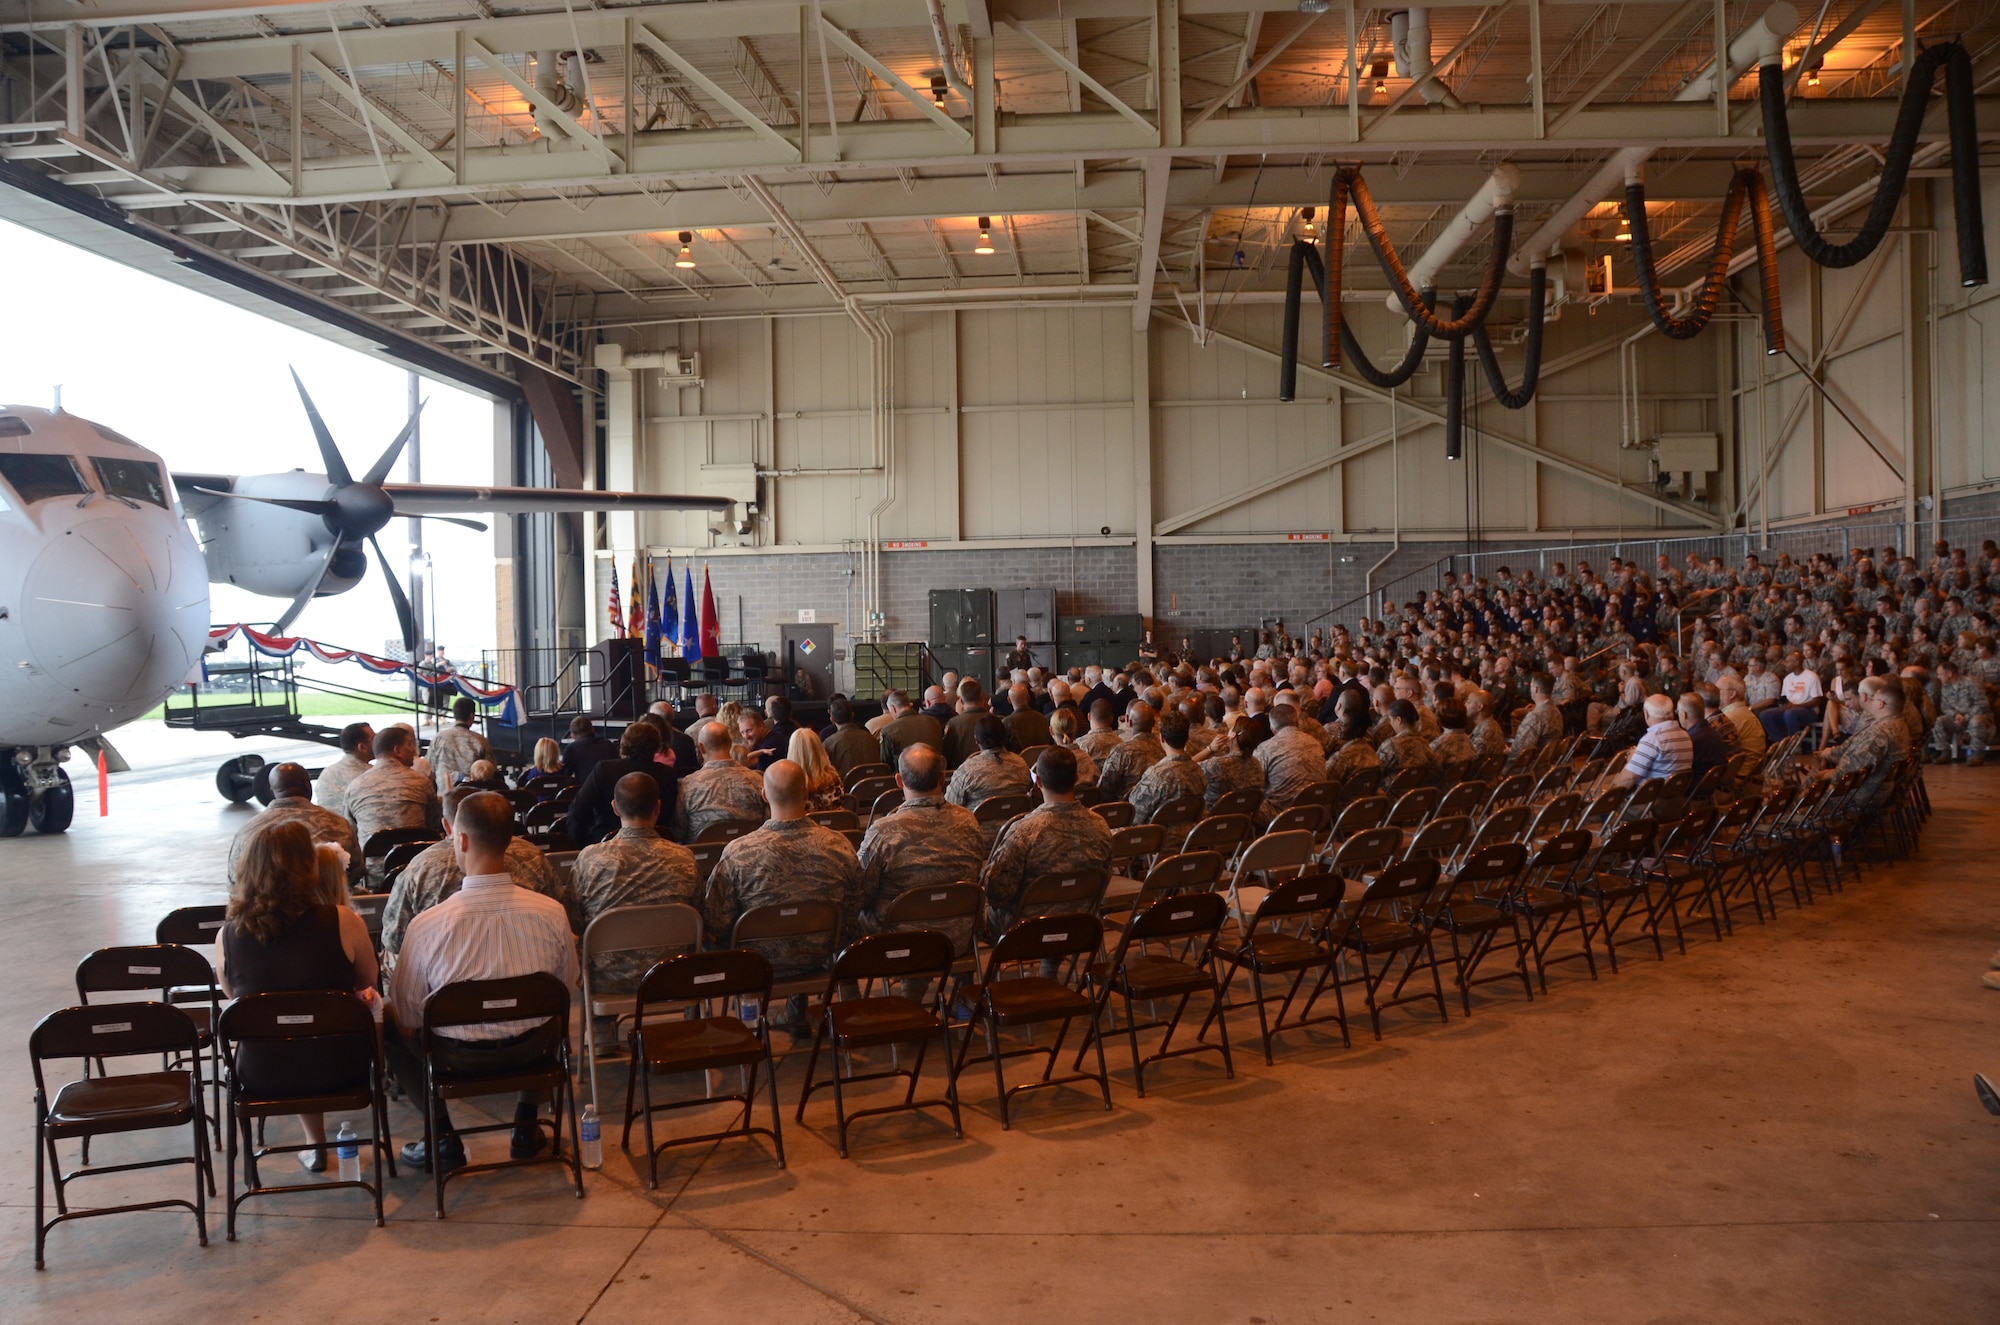 Members of the 175th Wing and distinguished visitors and community supporters celebrate the arrival of the C-27J Spartan on August 13, 2011 at Warfield Air National Guard base, Baltimore, MD.  The arrival of the C-27J Spartan marks the transition from the C-130J Hercules which had been with the Maryland Air Guard since 1999.  (U.S. Air Force photo by Technical Sgt. Christopher Schepers/RELEASED)